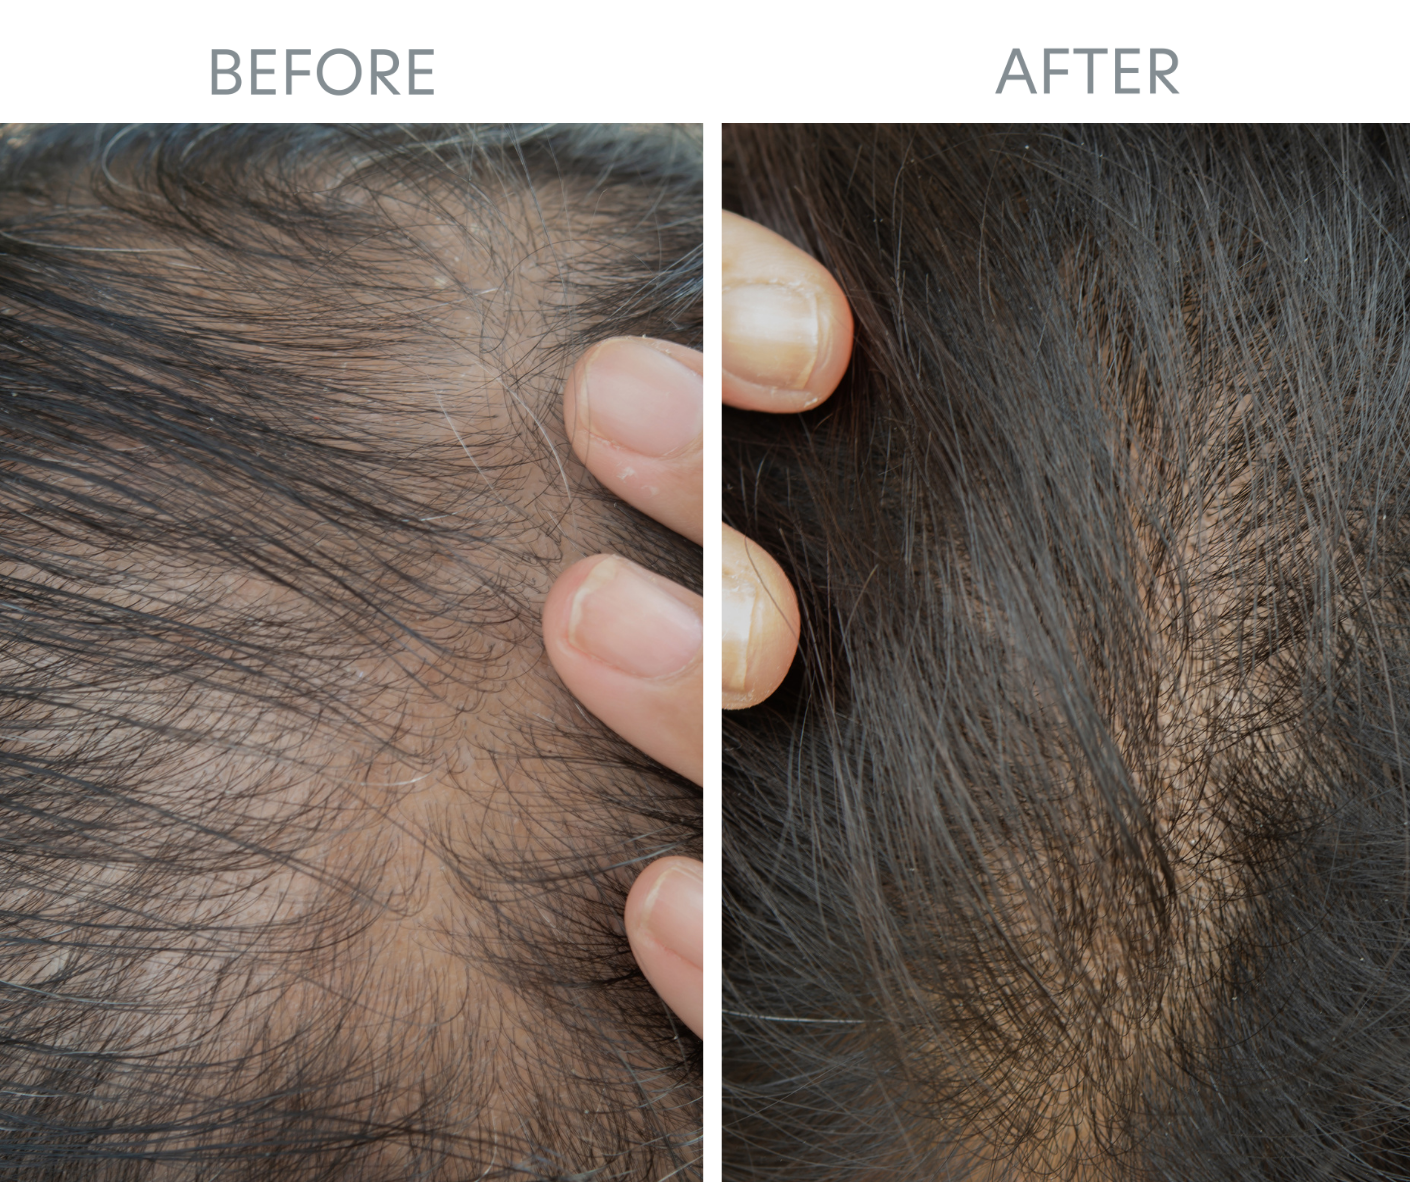 hair restoration before and after in men